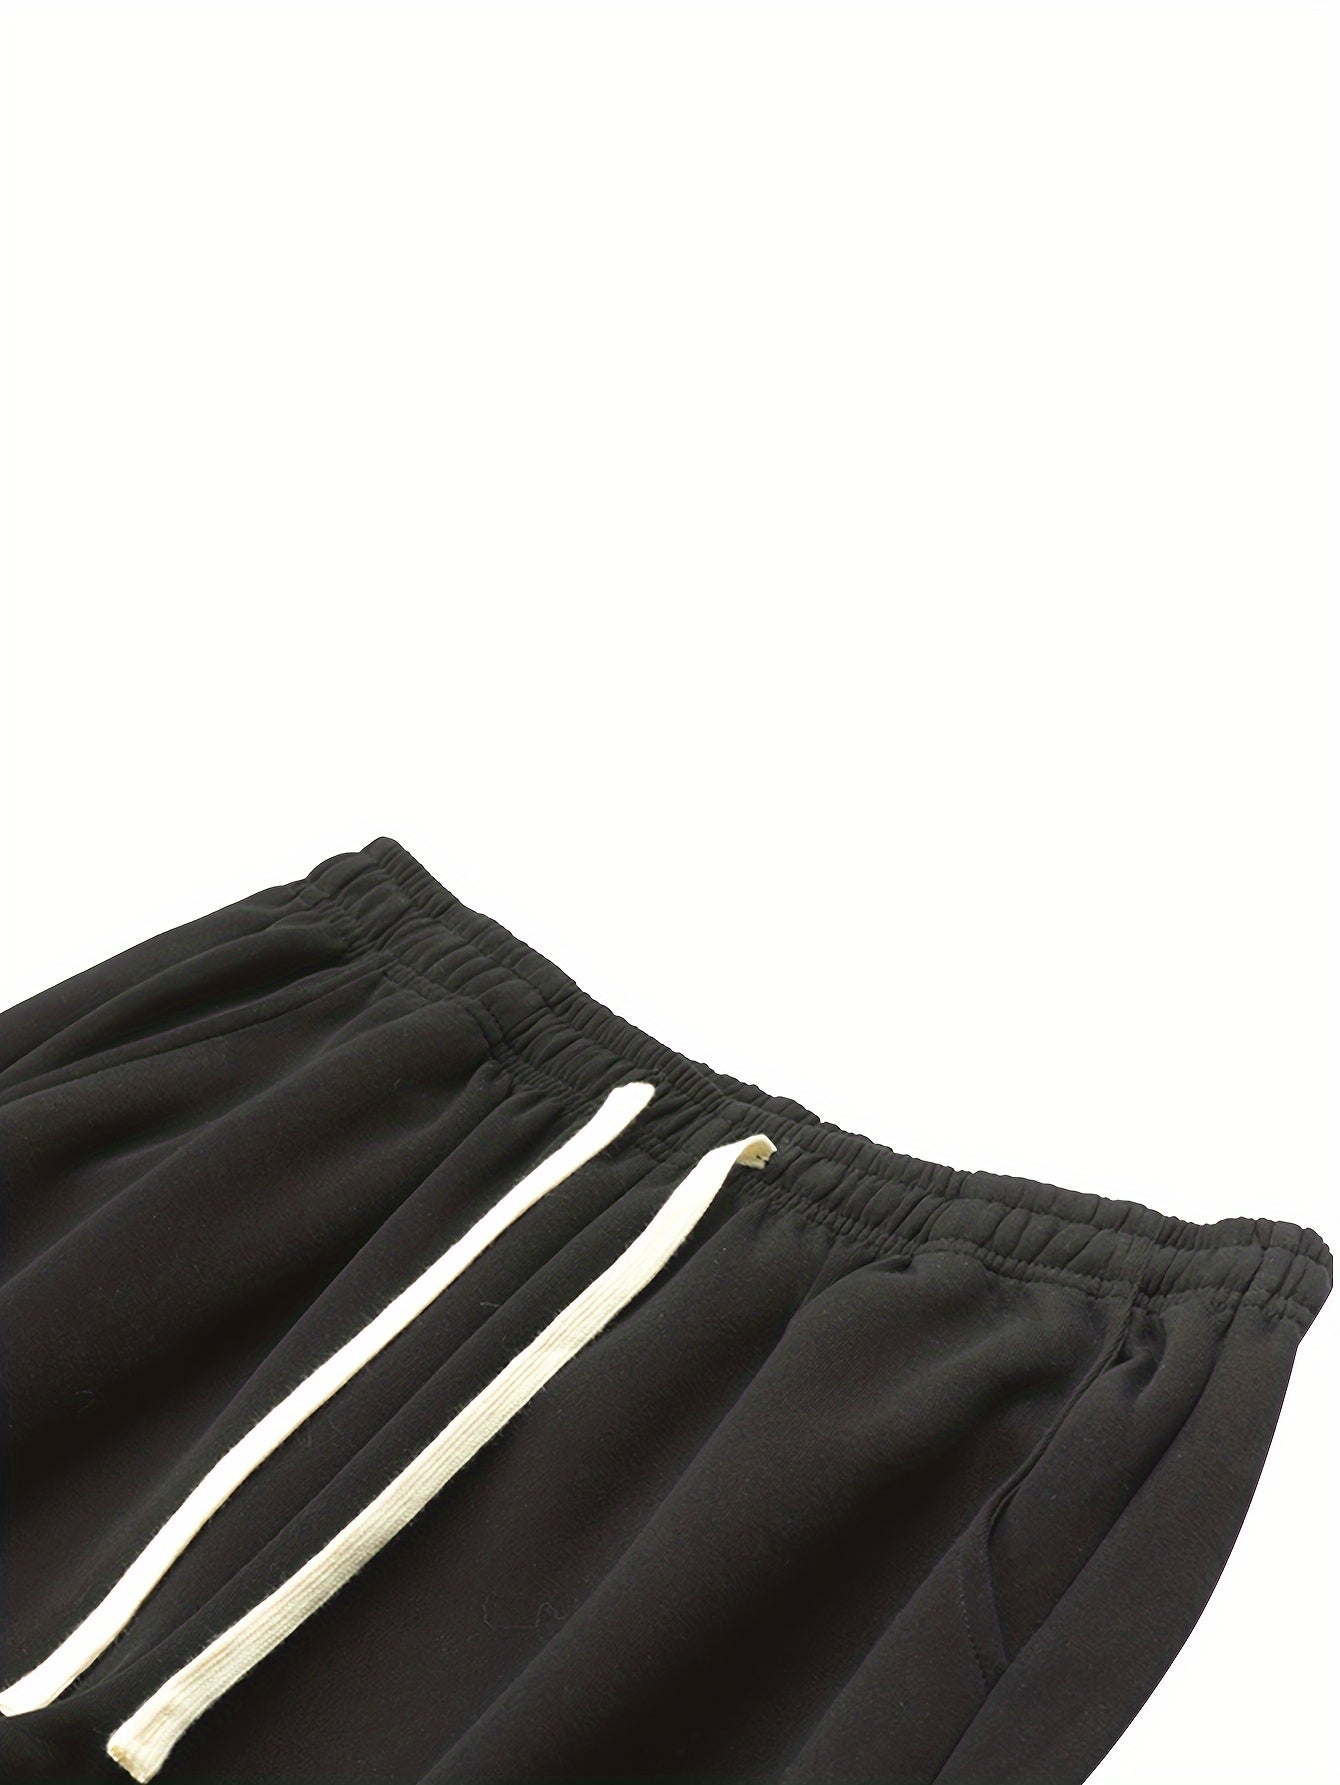 Men's Outdoor Sport Pants with Pockets and Drawstring - Spring/Autumn